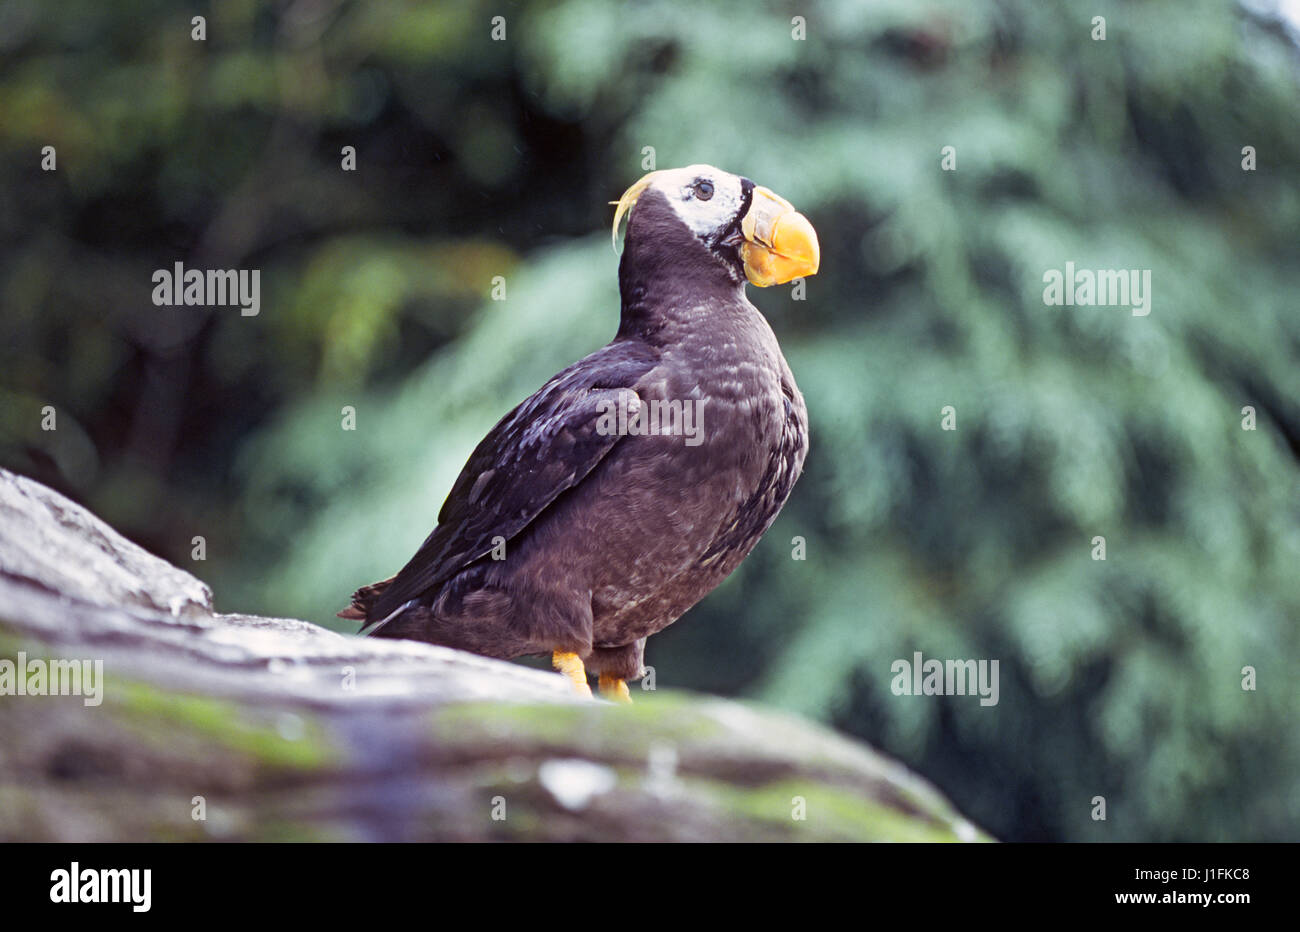 The  tufted puffin, also known as crested puffin,  Fratercula cirrhata,  is a relatively abundant medium-sized pelagic seabird in the auk family found throughout the North Pacific Ocean. This one was in Bandon, Oregon Stock Photo